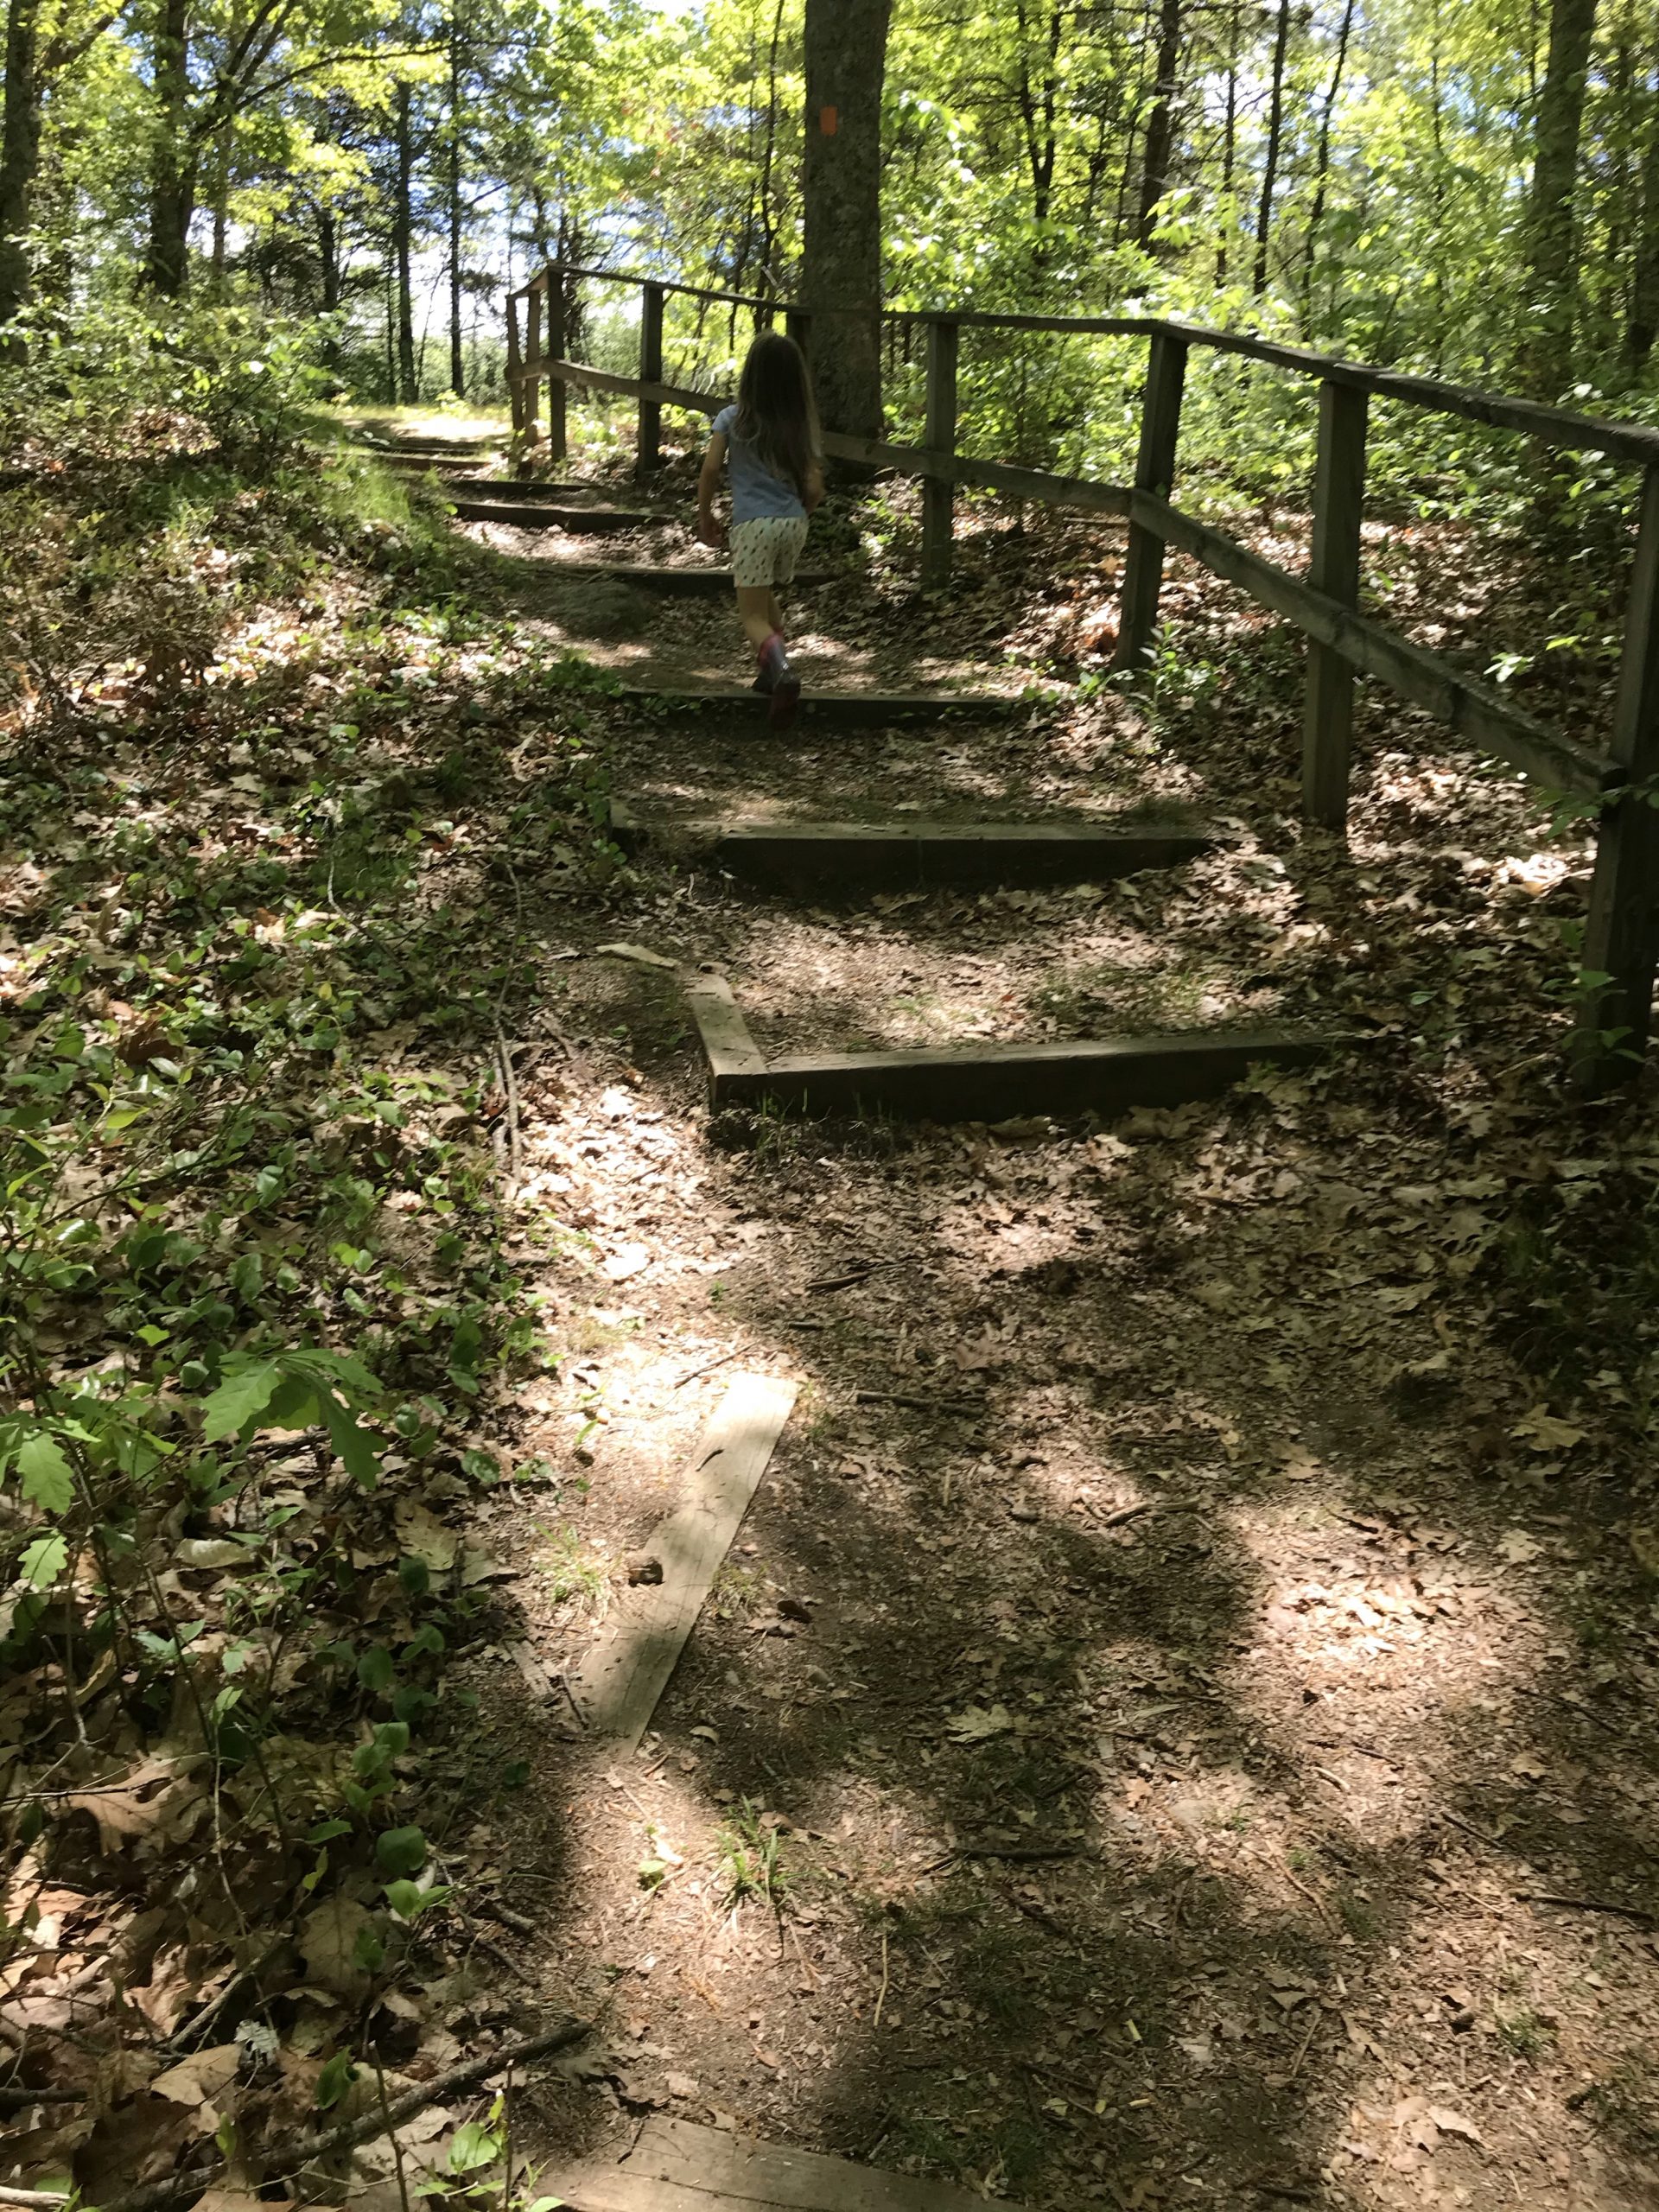 George B. Parker Woodland Wildlife Refuge in Coventry Rhode Island with the kids hiking